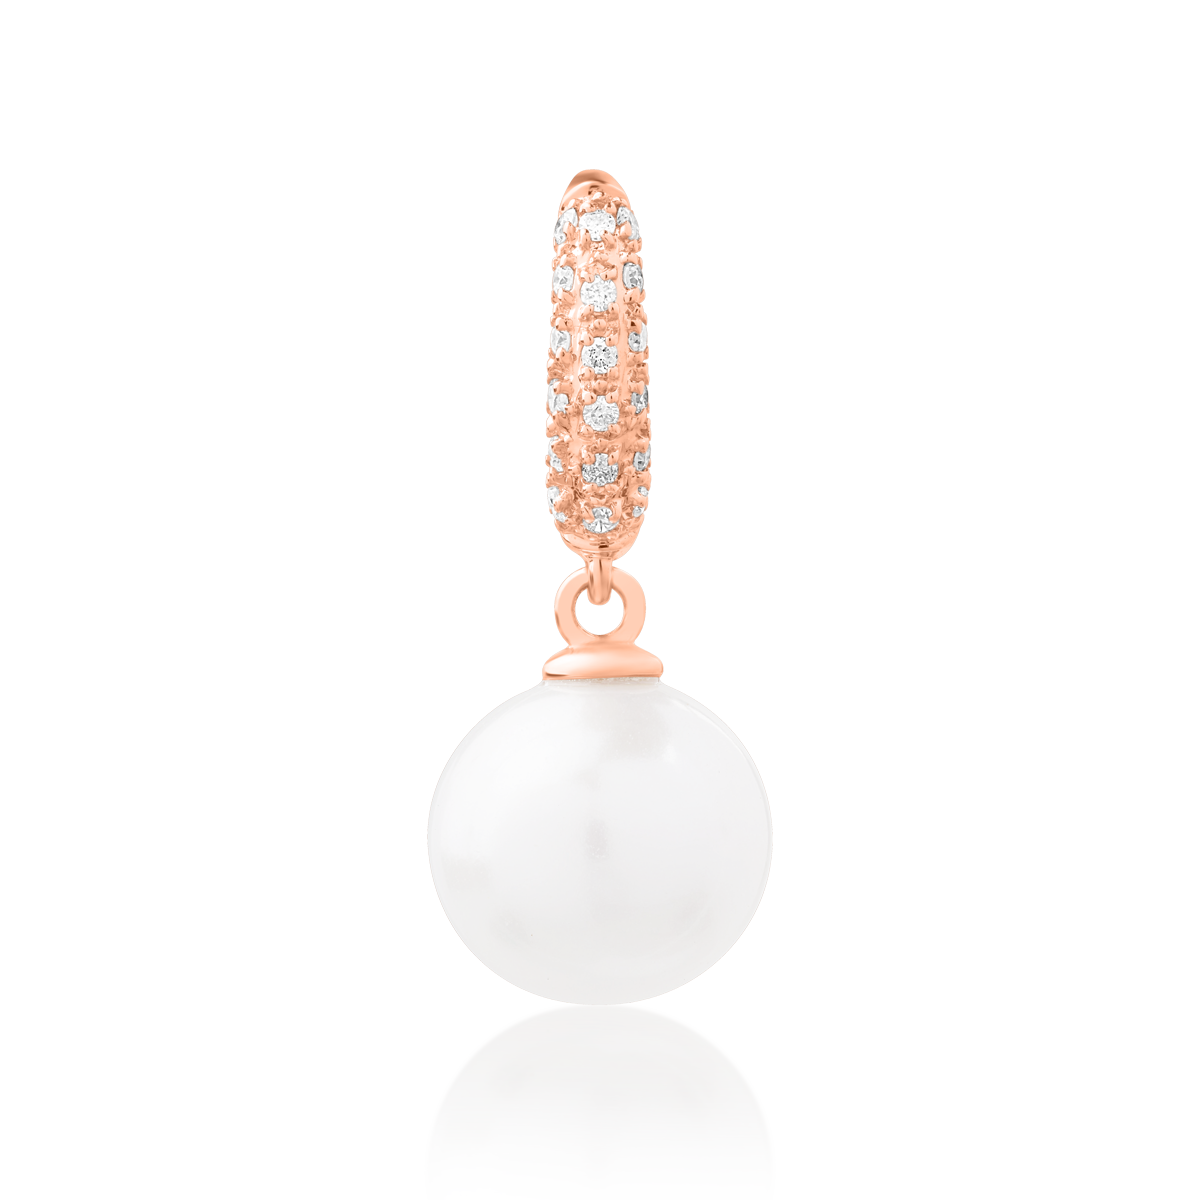 14K rose gold pendant with 3.98ct freshwater pearl and 0.07ct diamonds